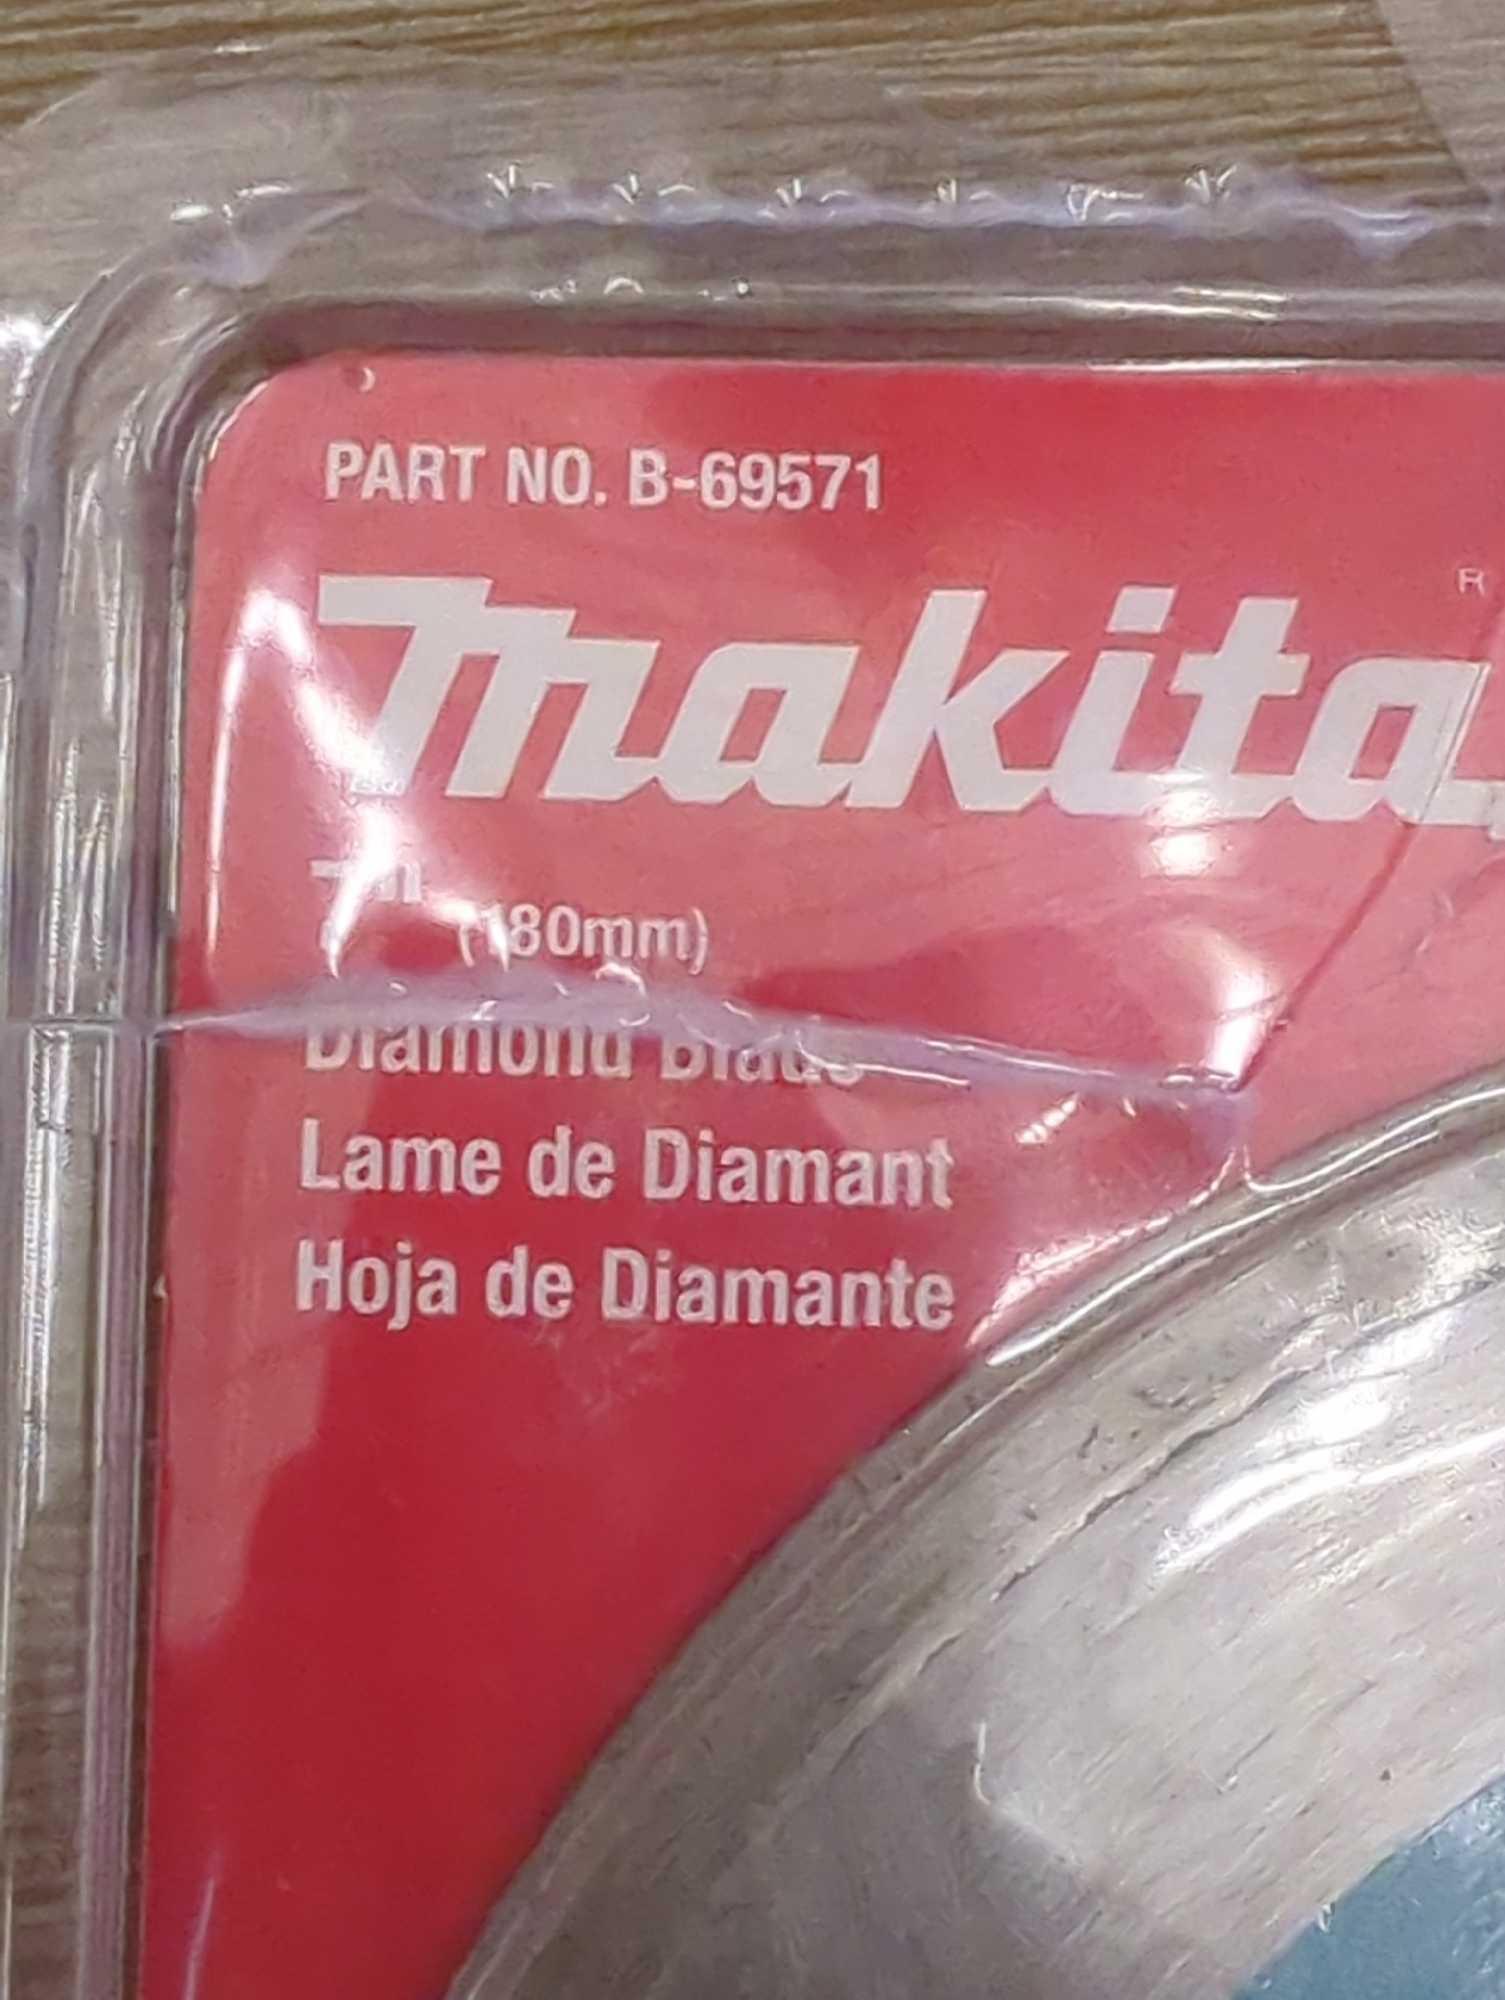 Makita 7 in. Continuous Rim Diamond Blade for General Purpose, Appears to be New in Factory Sealed